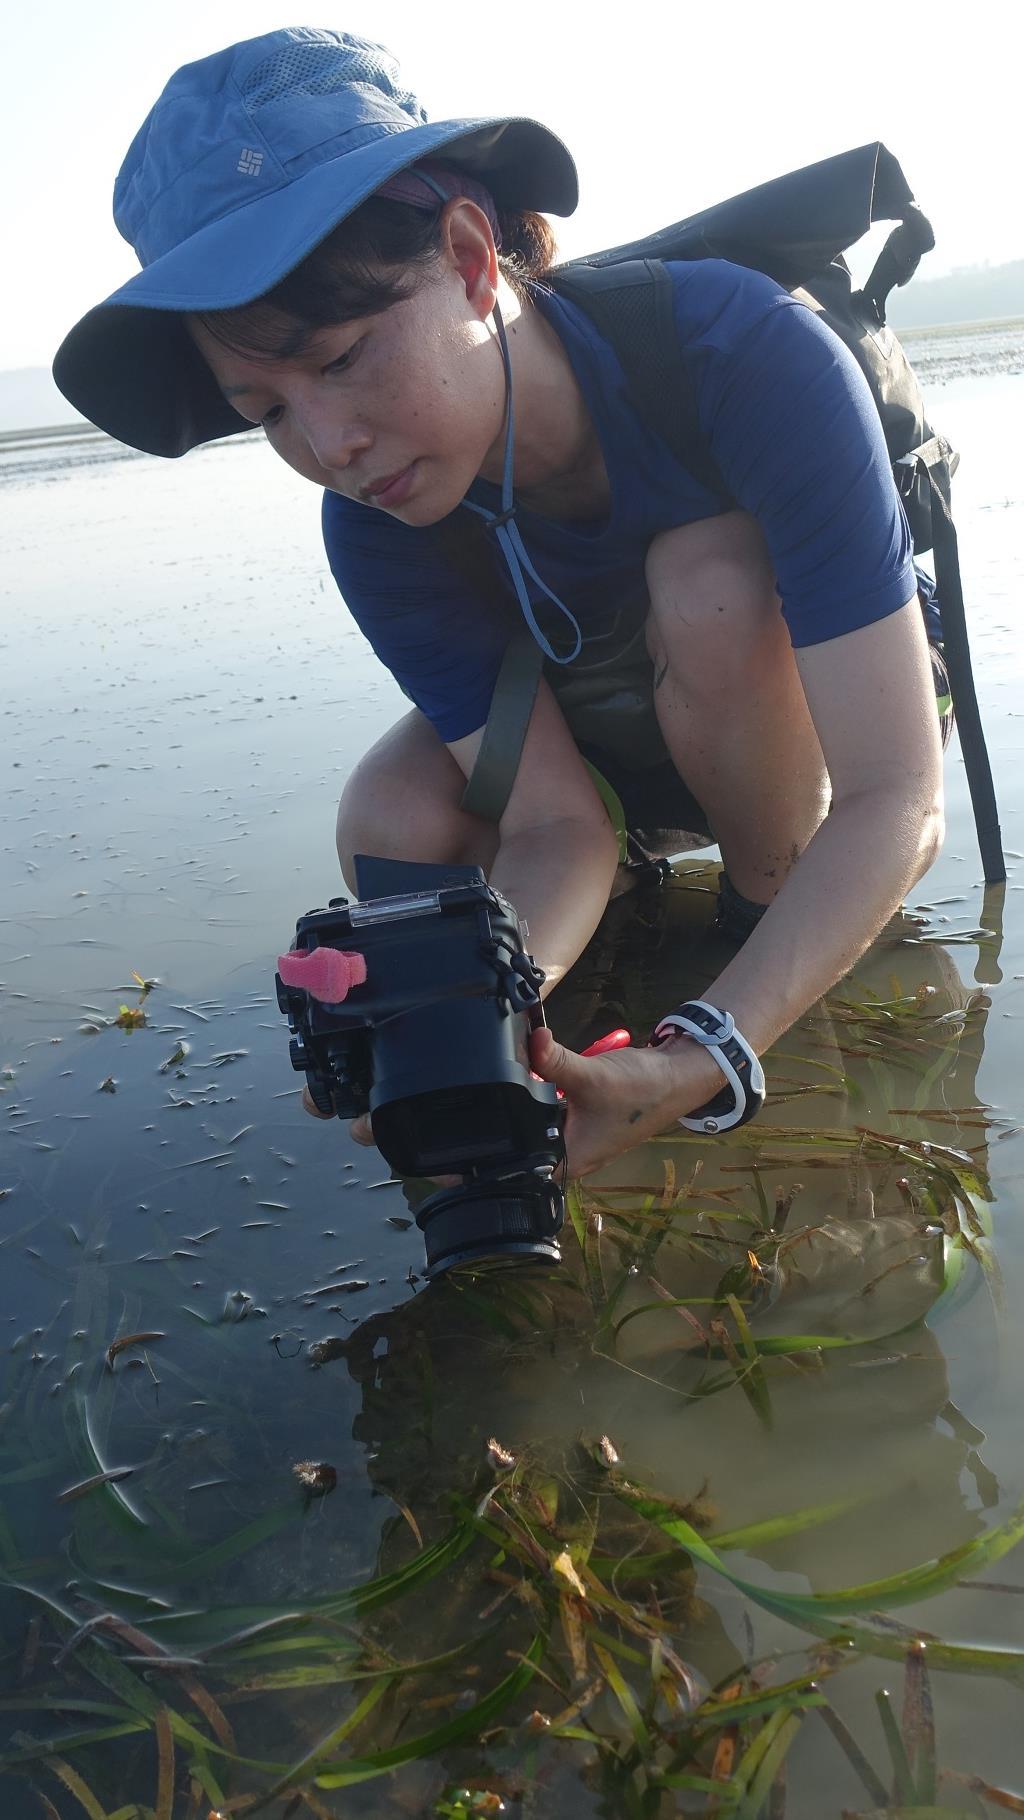 With camera in hand, Jillian Ooi documents flowering seagrass in the Setindan Island meadow, Malaysia. Ooi will investigate techniques and identify conditions to improve seagrass restoration practices.